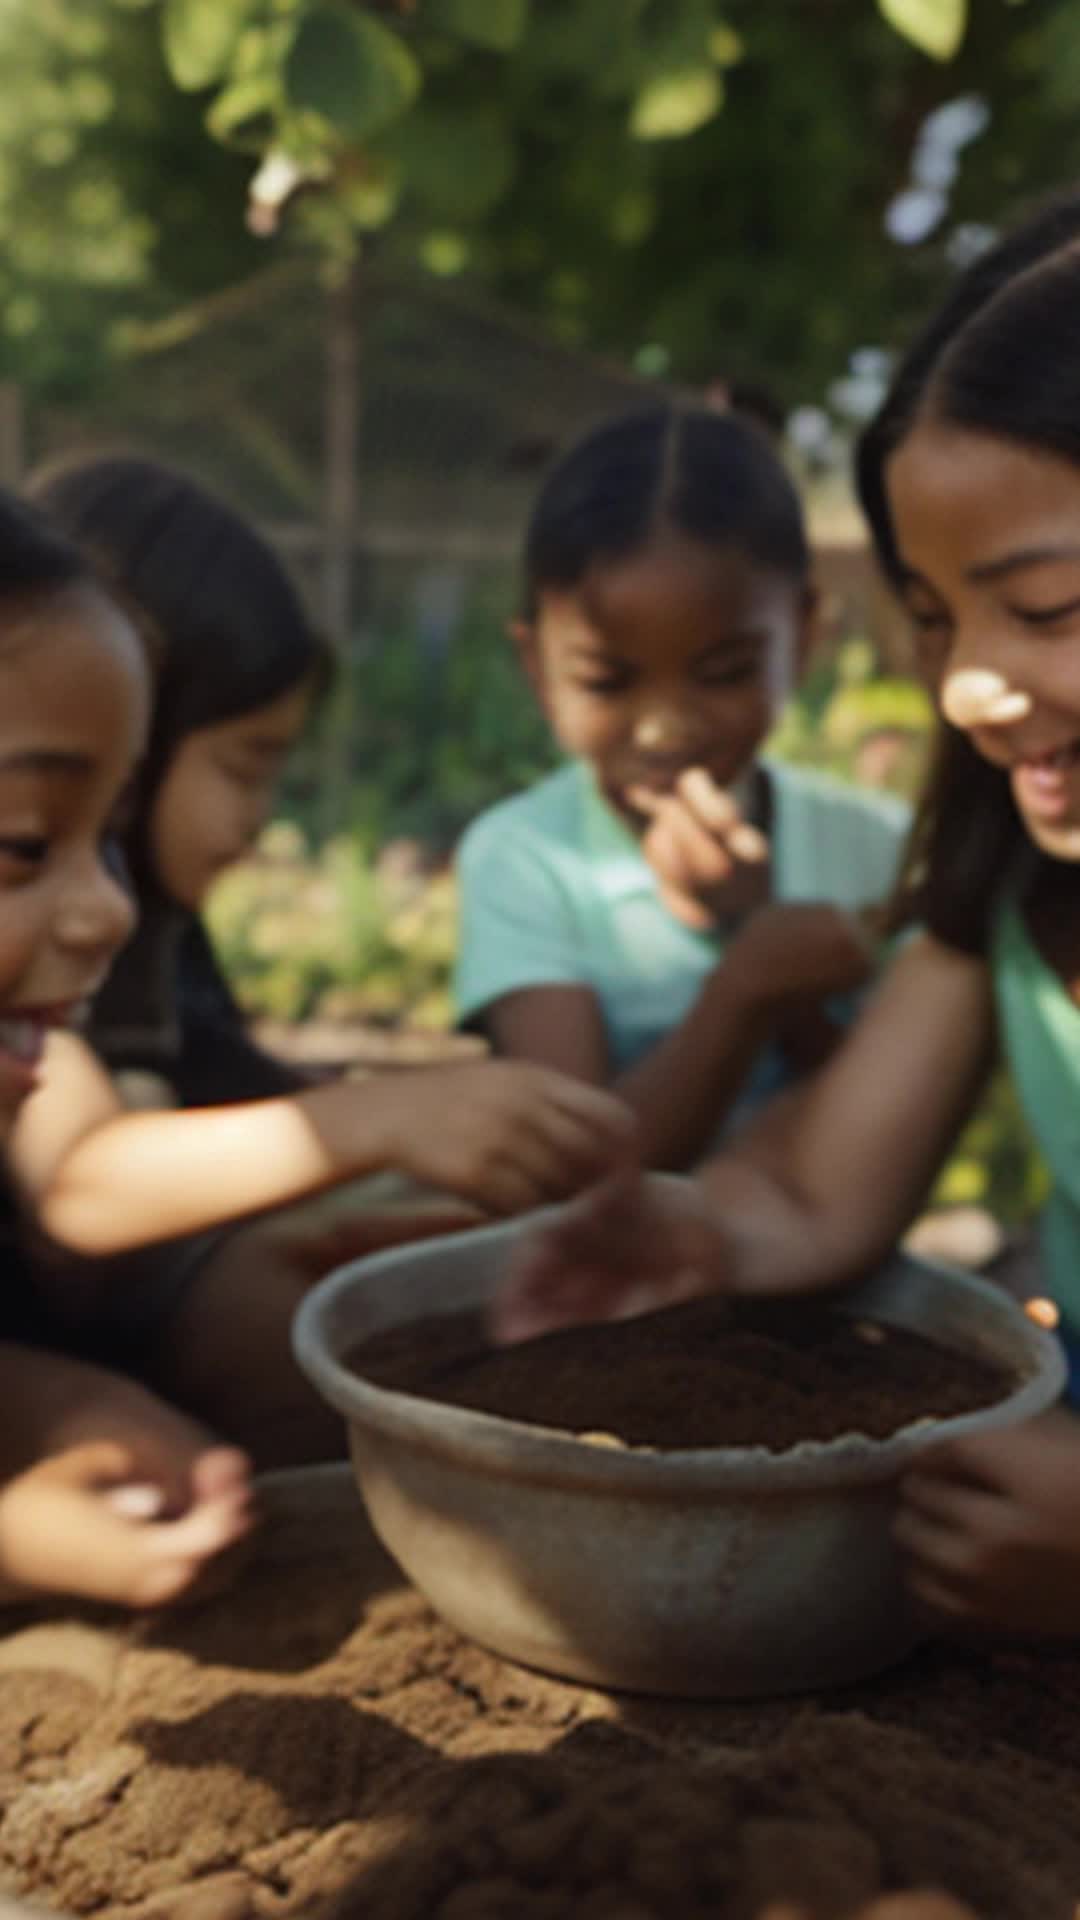 Energetic eight-year-olds planting beans in bustling community garden, delicate touch, cool soil between fingers, laughter echoing, mint leaves scent in air, playful, gentle breeze rustling through, soft shadows, wide-angle shot capturing the lively scene